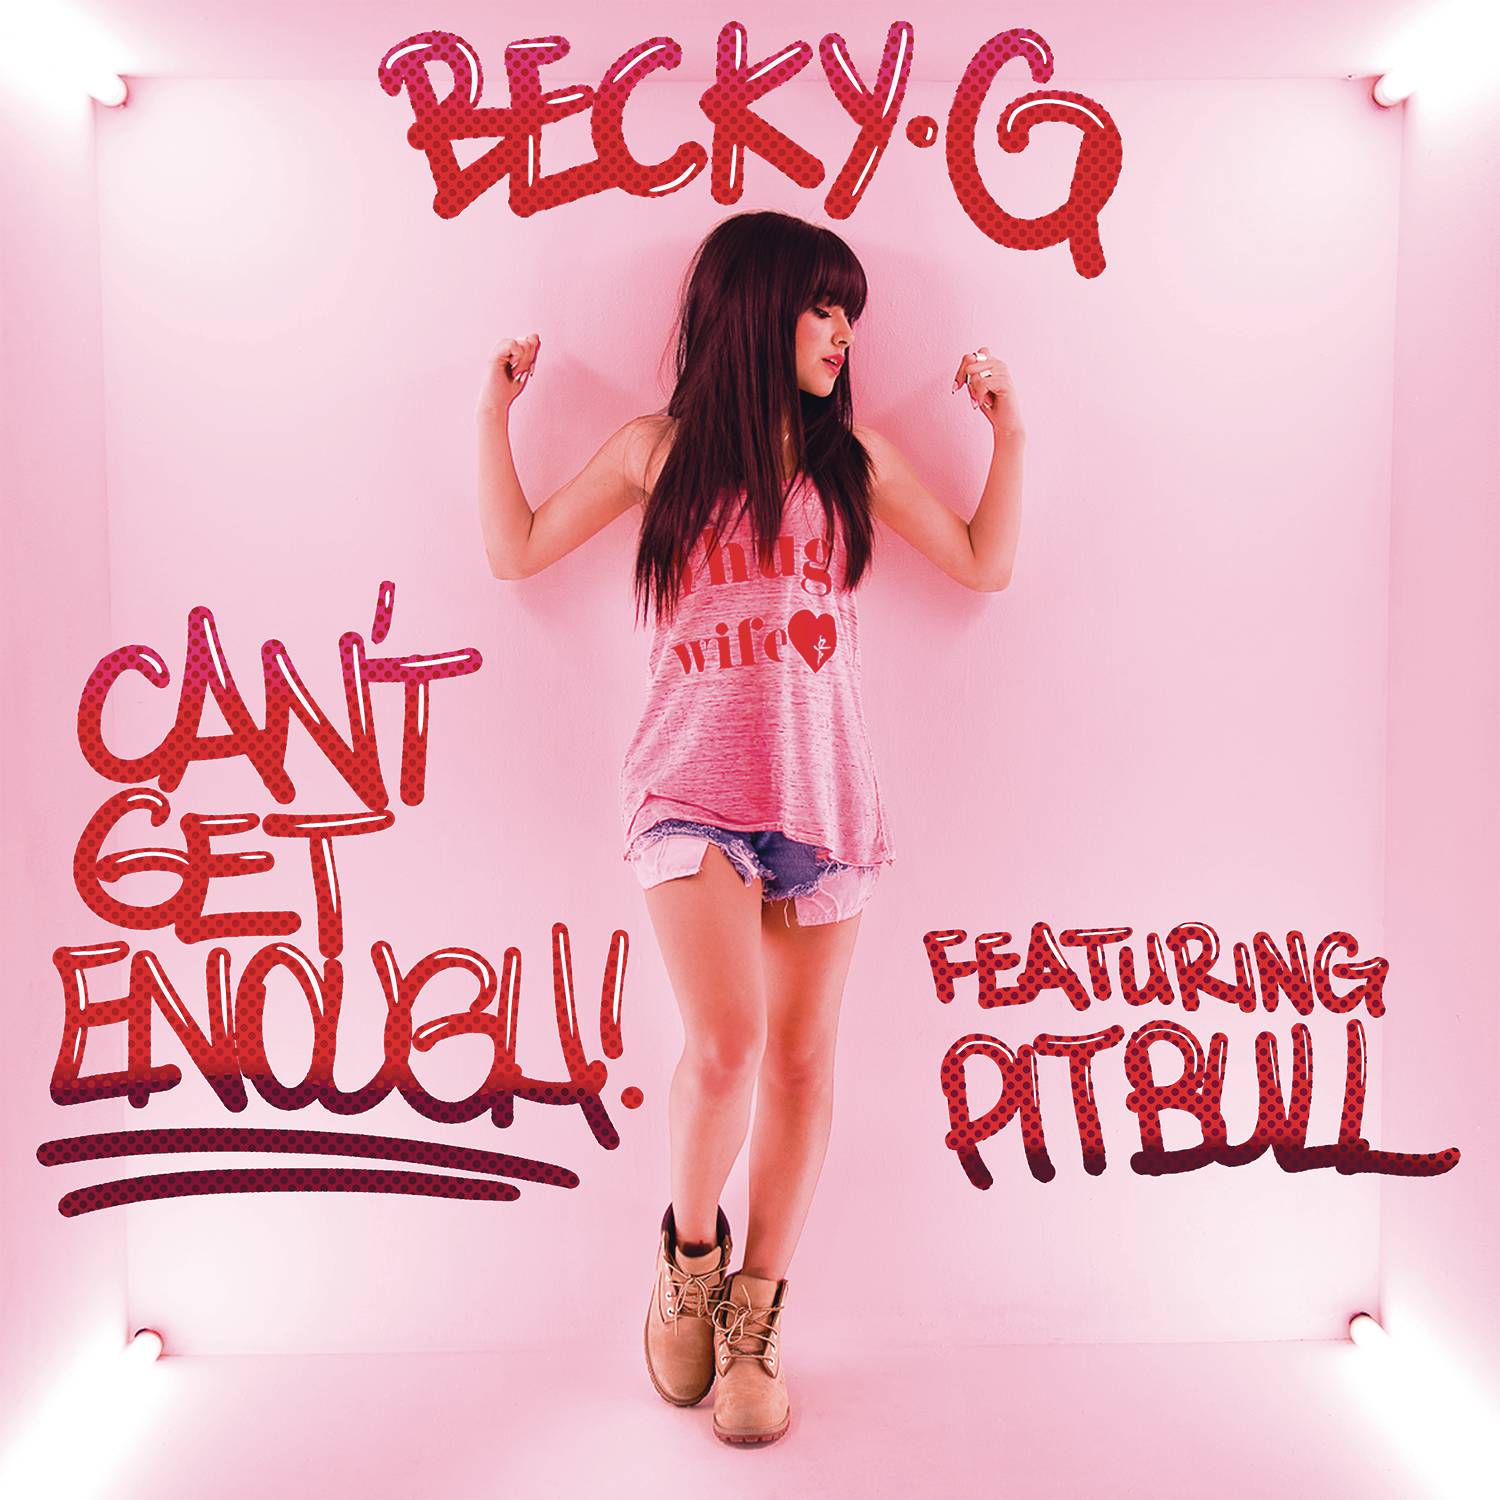 Can't Get Enough (feat. Pitbull) [Spanish Version]